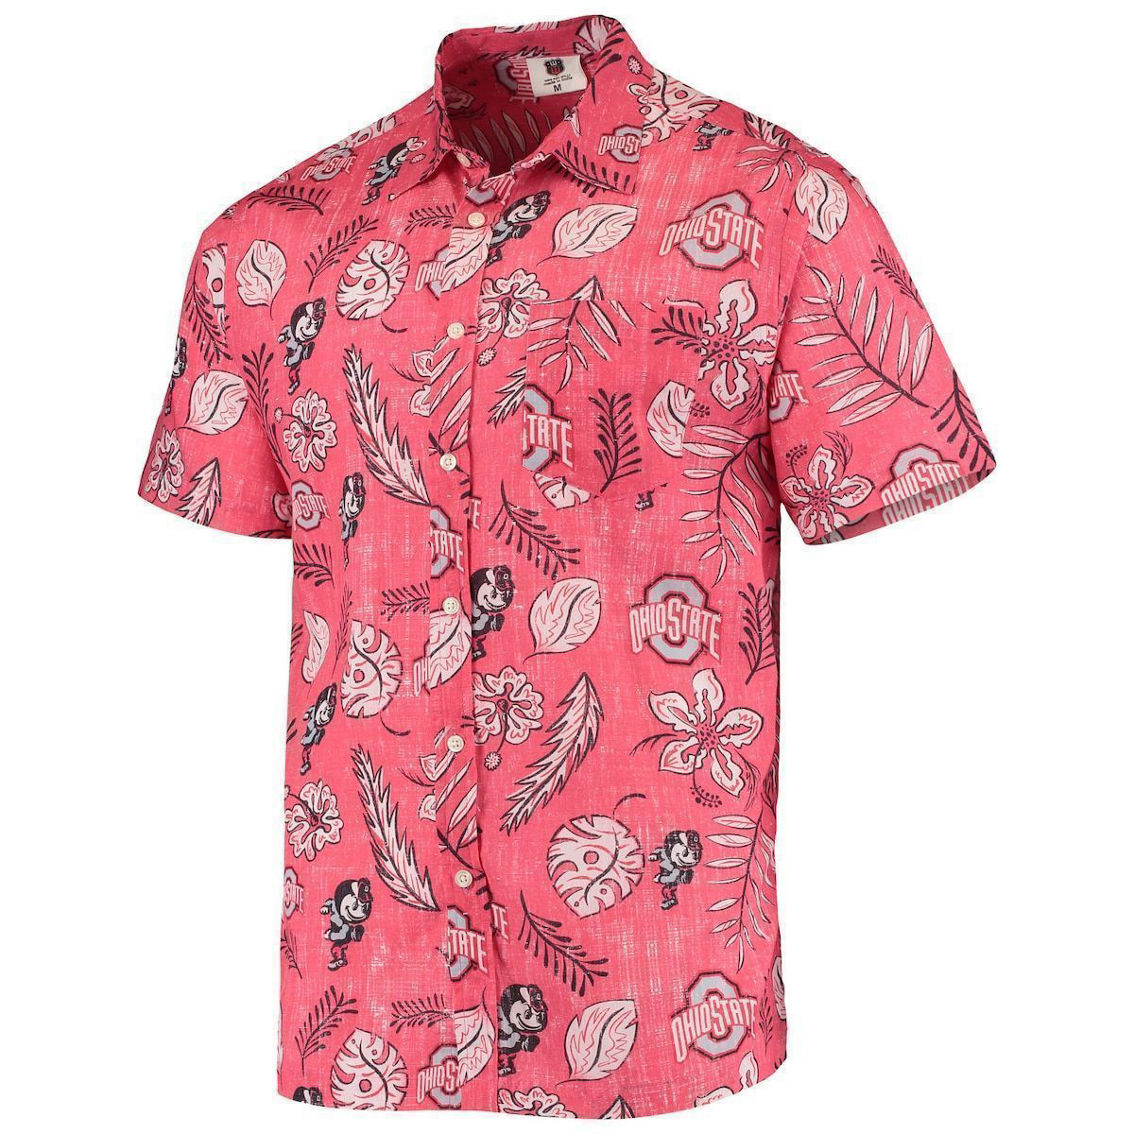 Wes & Willy Men's Scarlet Ohio State Buckeyes Vintage Floral Button-Up Shirt - Image 3 of 4